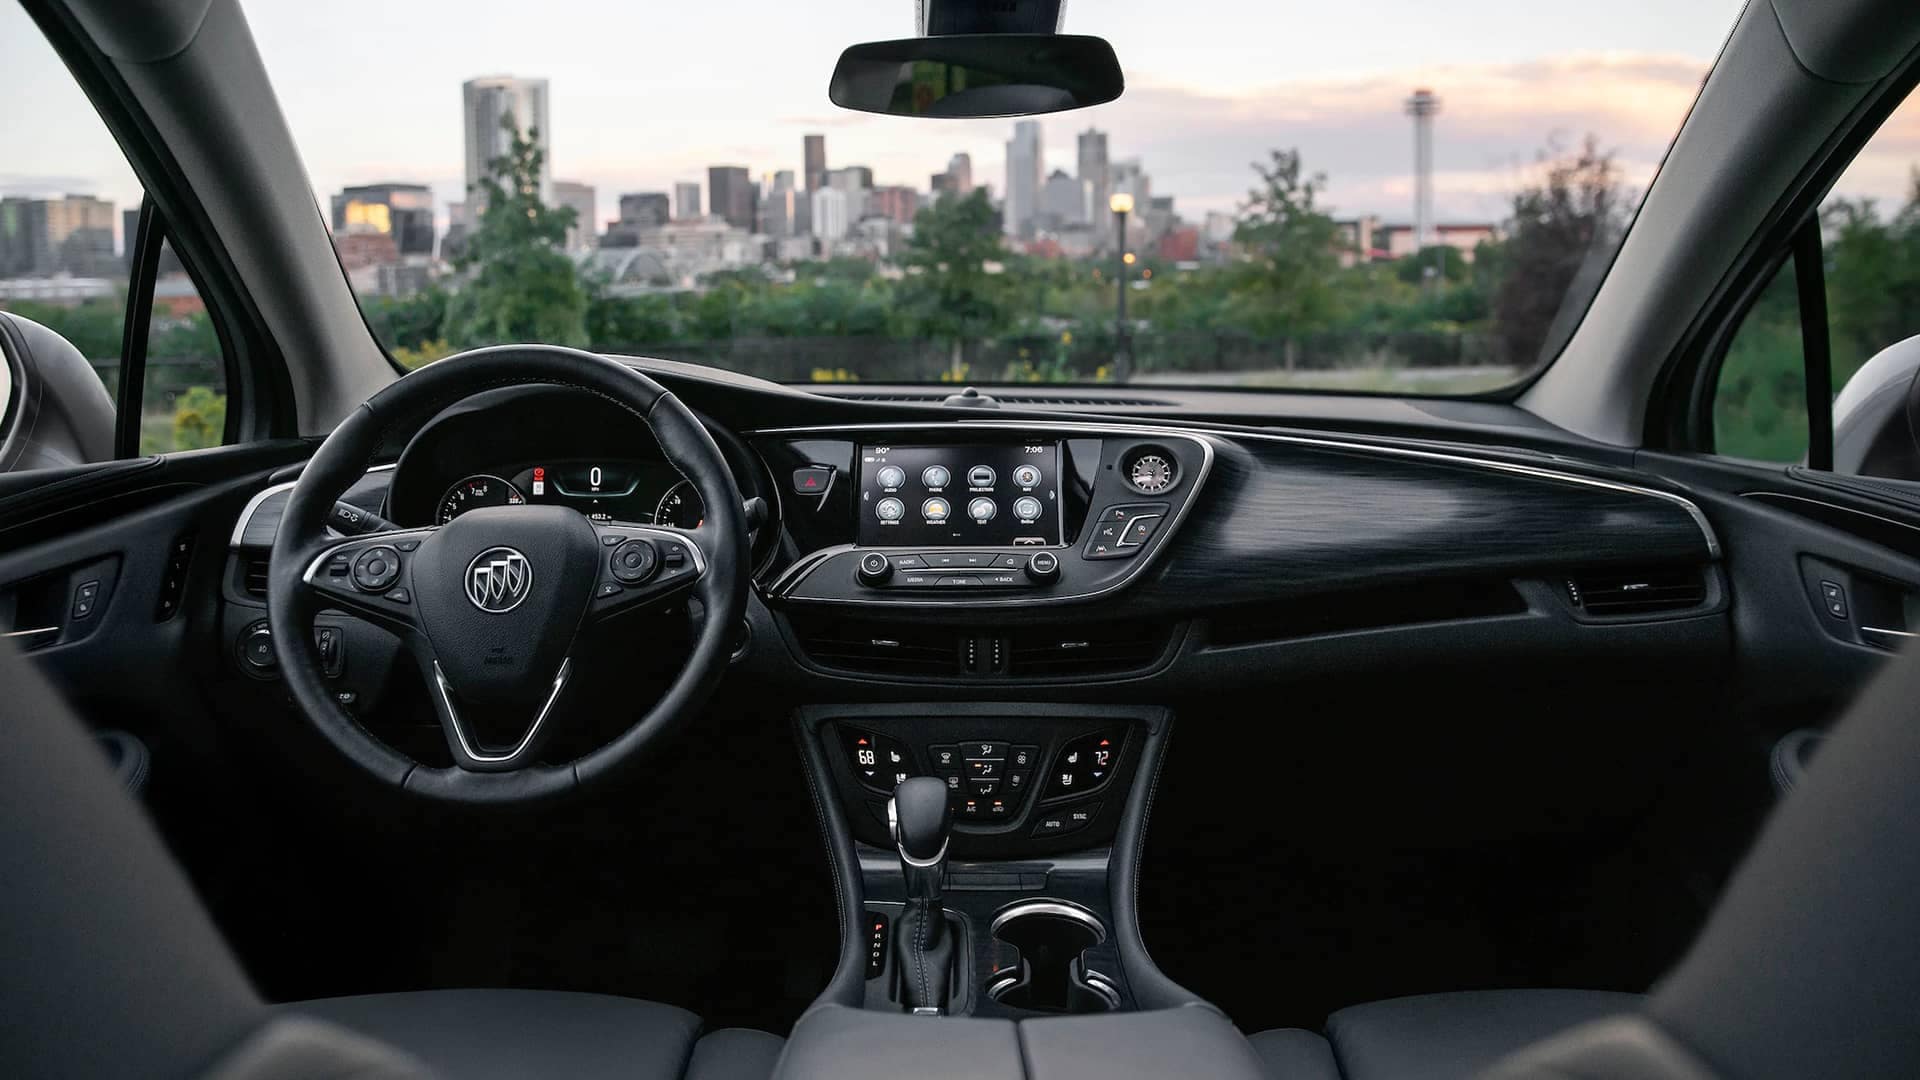 2020 Buick Envision Compact SUV Steering Wheel and Infotainment